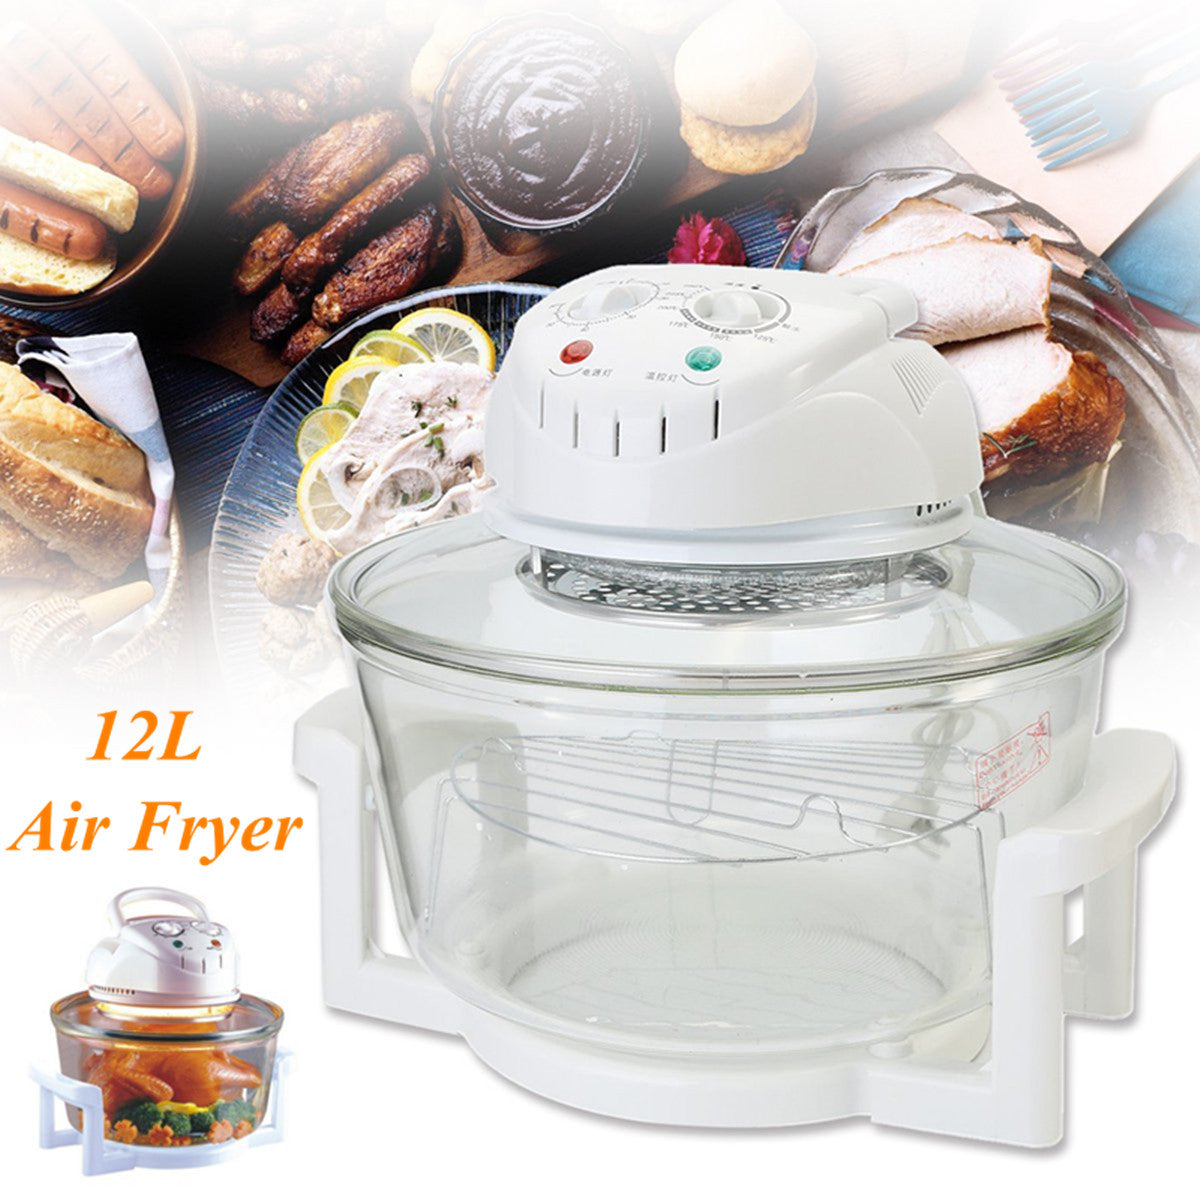 12L 220V 1300W Oilless Electric Air Fryer Low Fat Multifunctional Kitchen Tool